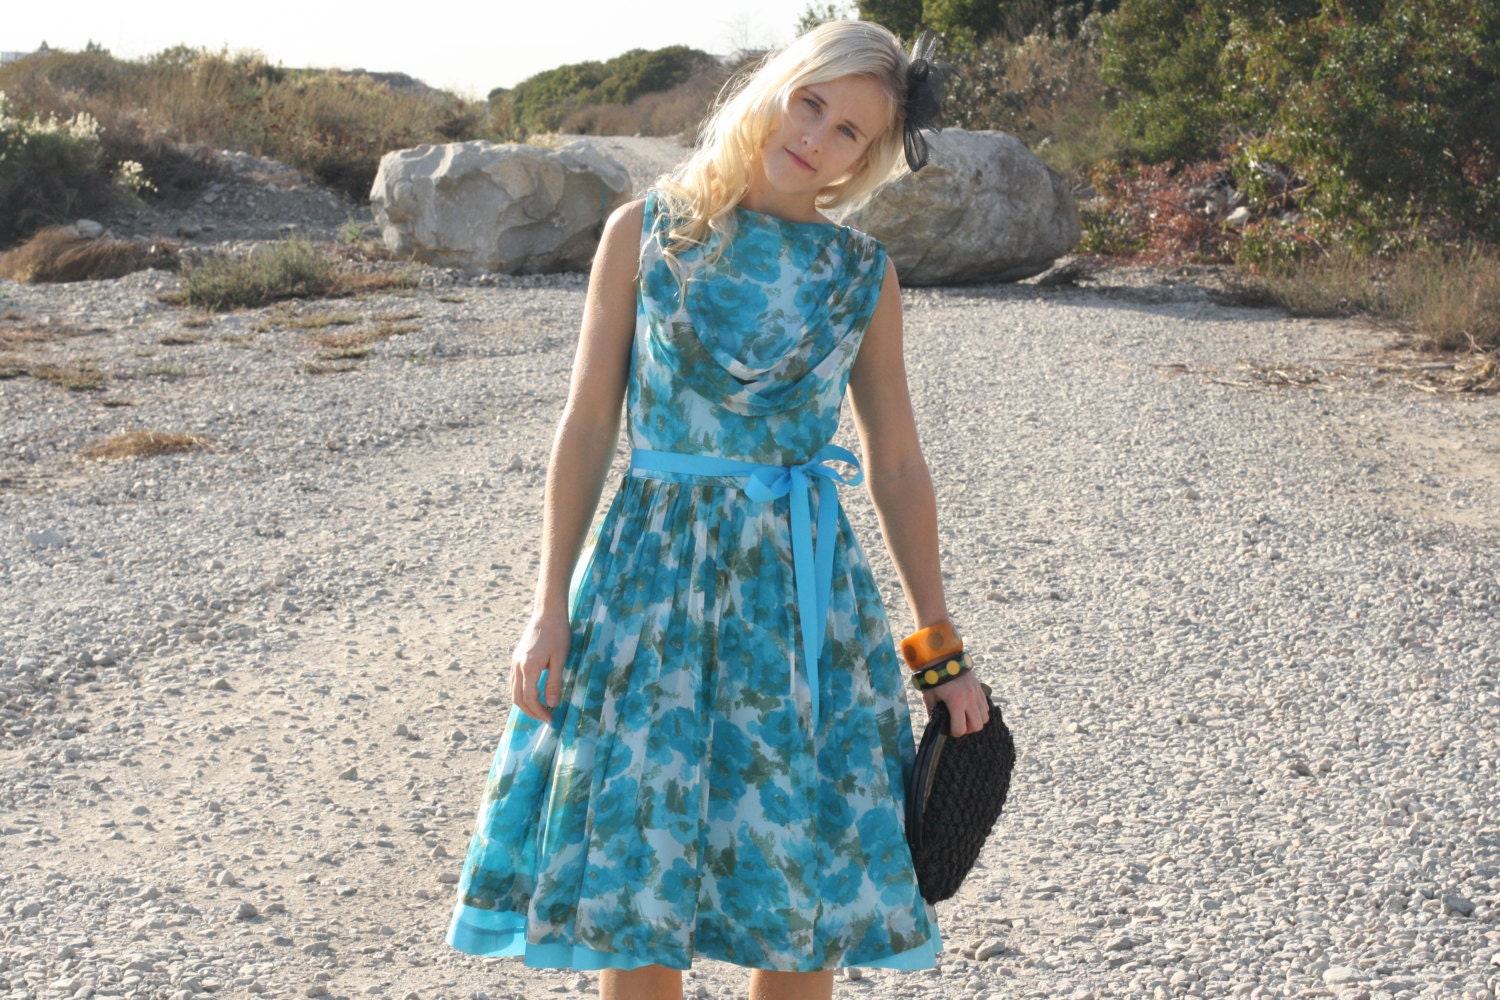 Vintage 50s Dress / 1950s Party Dress / Turquoise Floral Party Dress w/ Pleated Skirt L